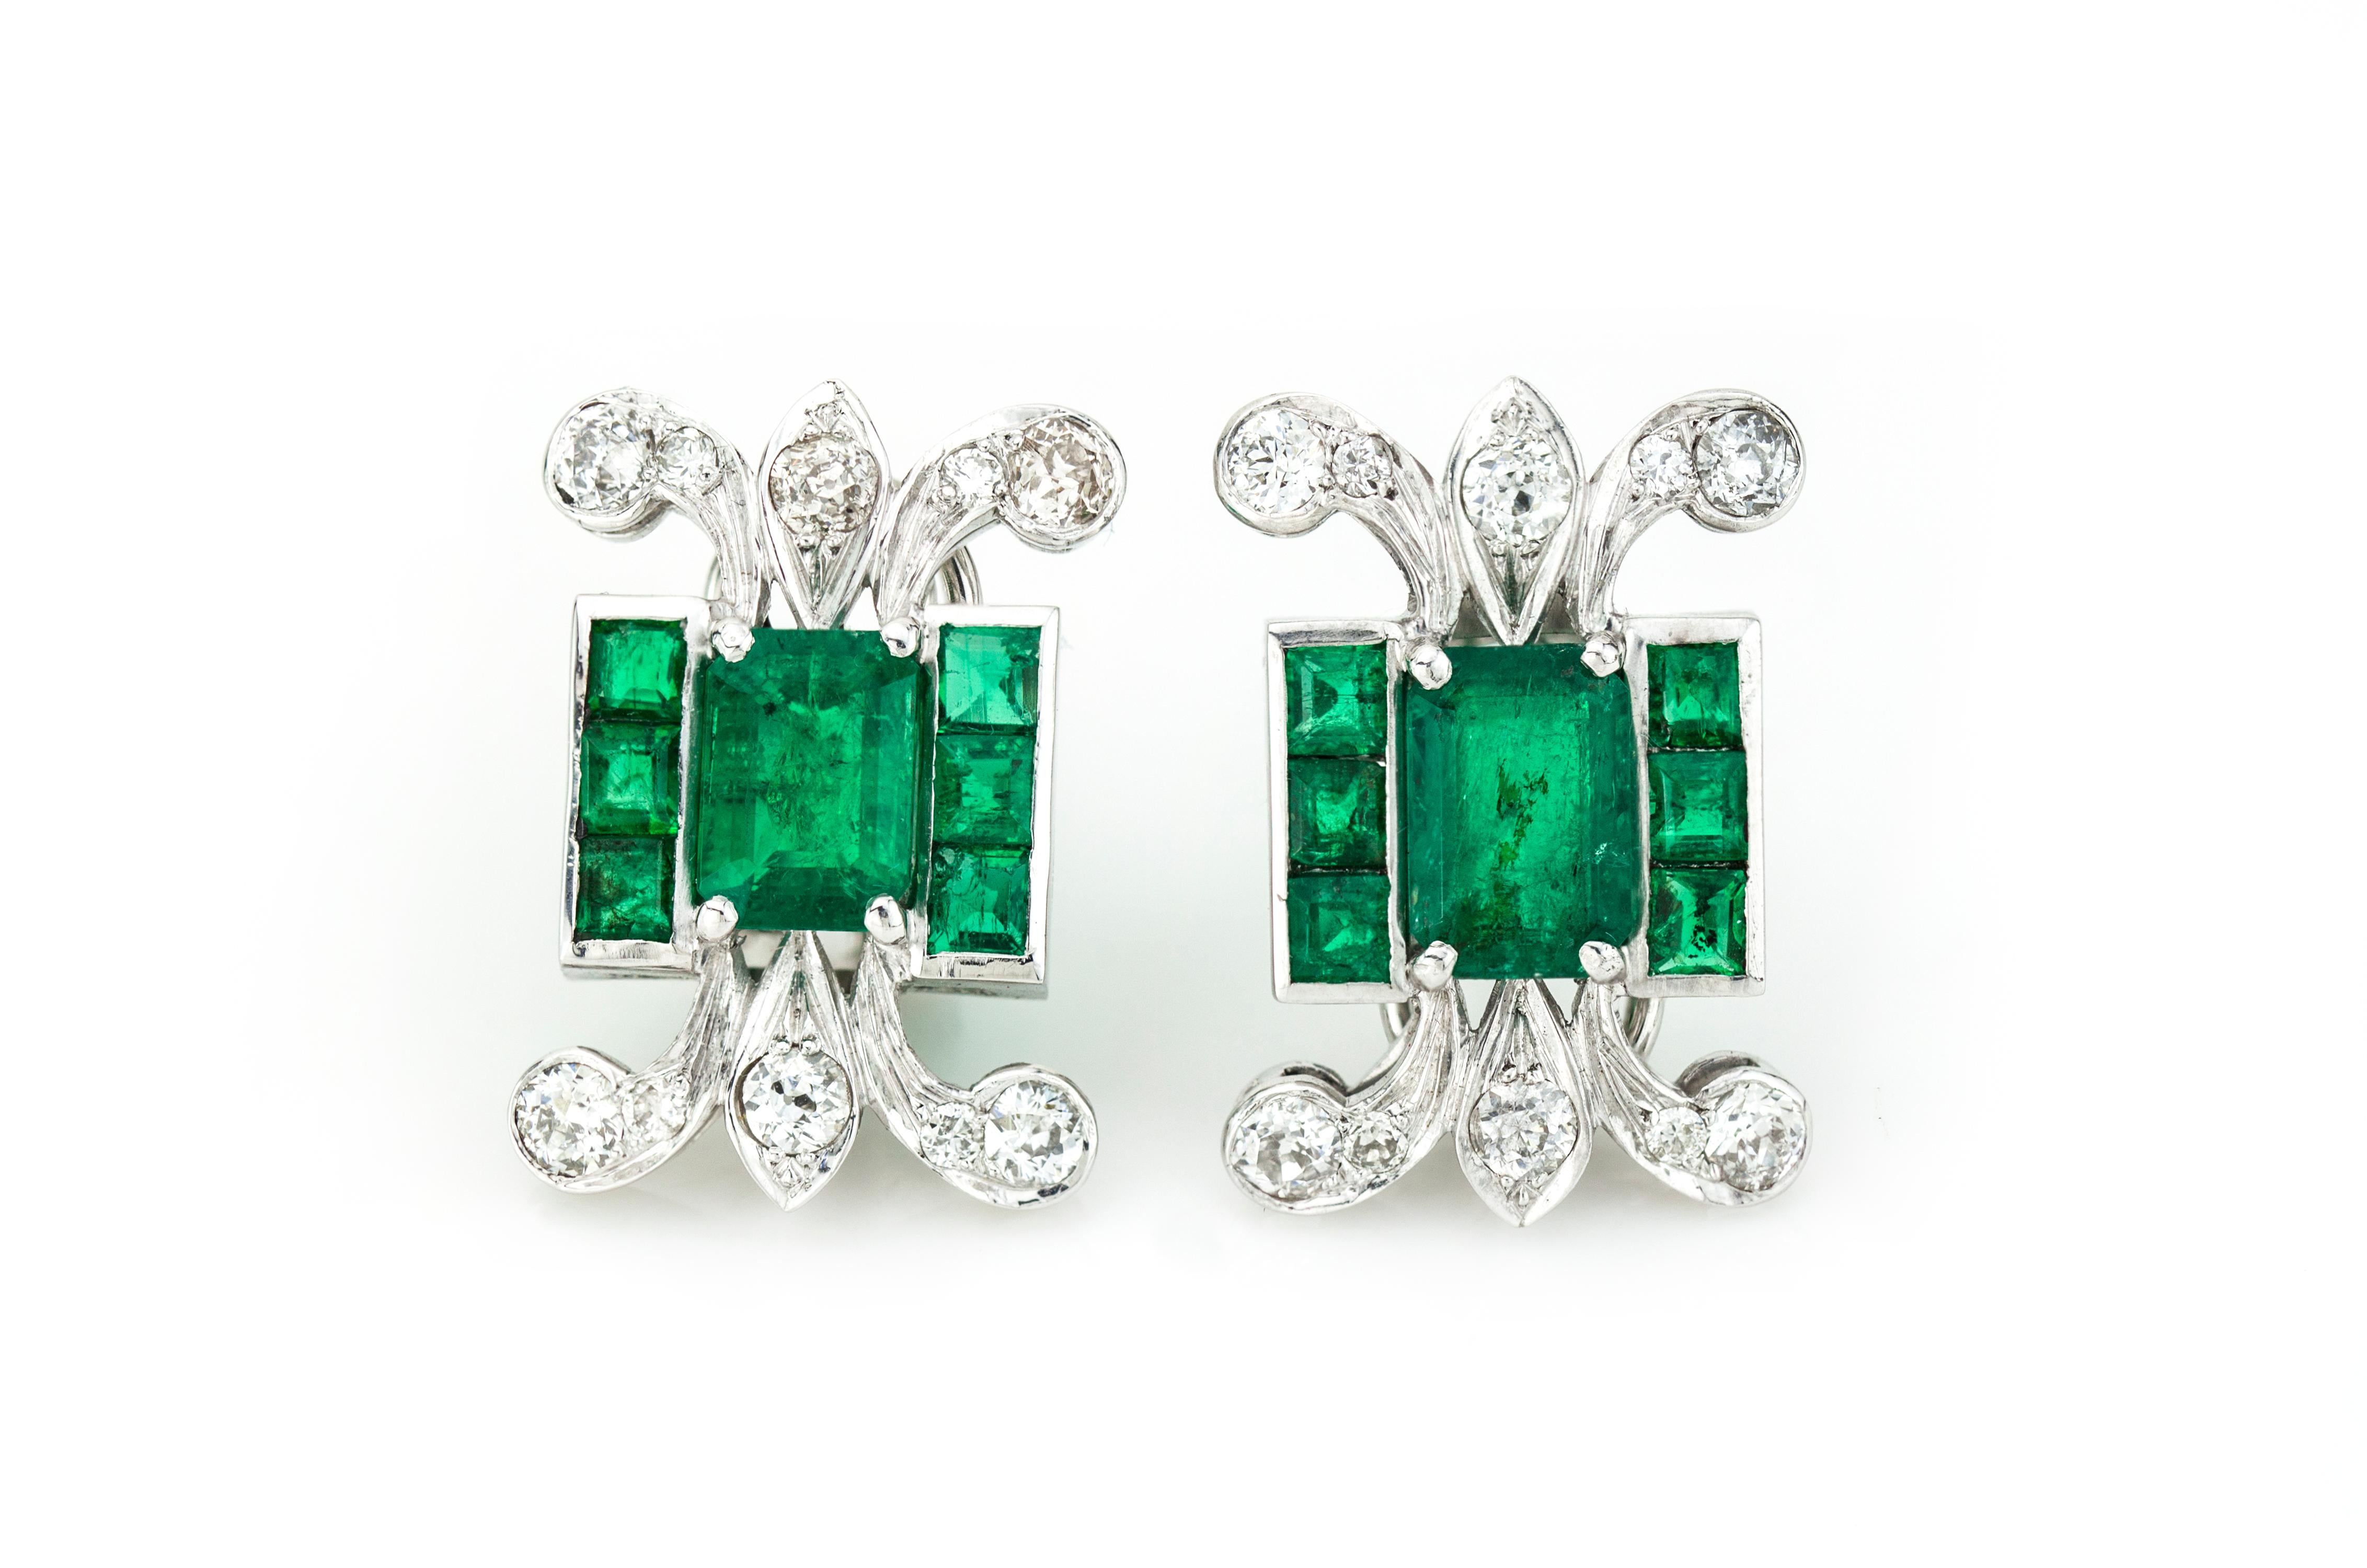 Platinum ladies clip-on earrings with natural Colombian emeralds, main stones on earrings weighing 1.6 ct each, also 0.30 carats of surrounding emeralds. Totalling 3.80 carats of emeralds.

Comes with GCS Certificate

Tested positive for